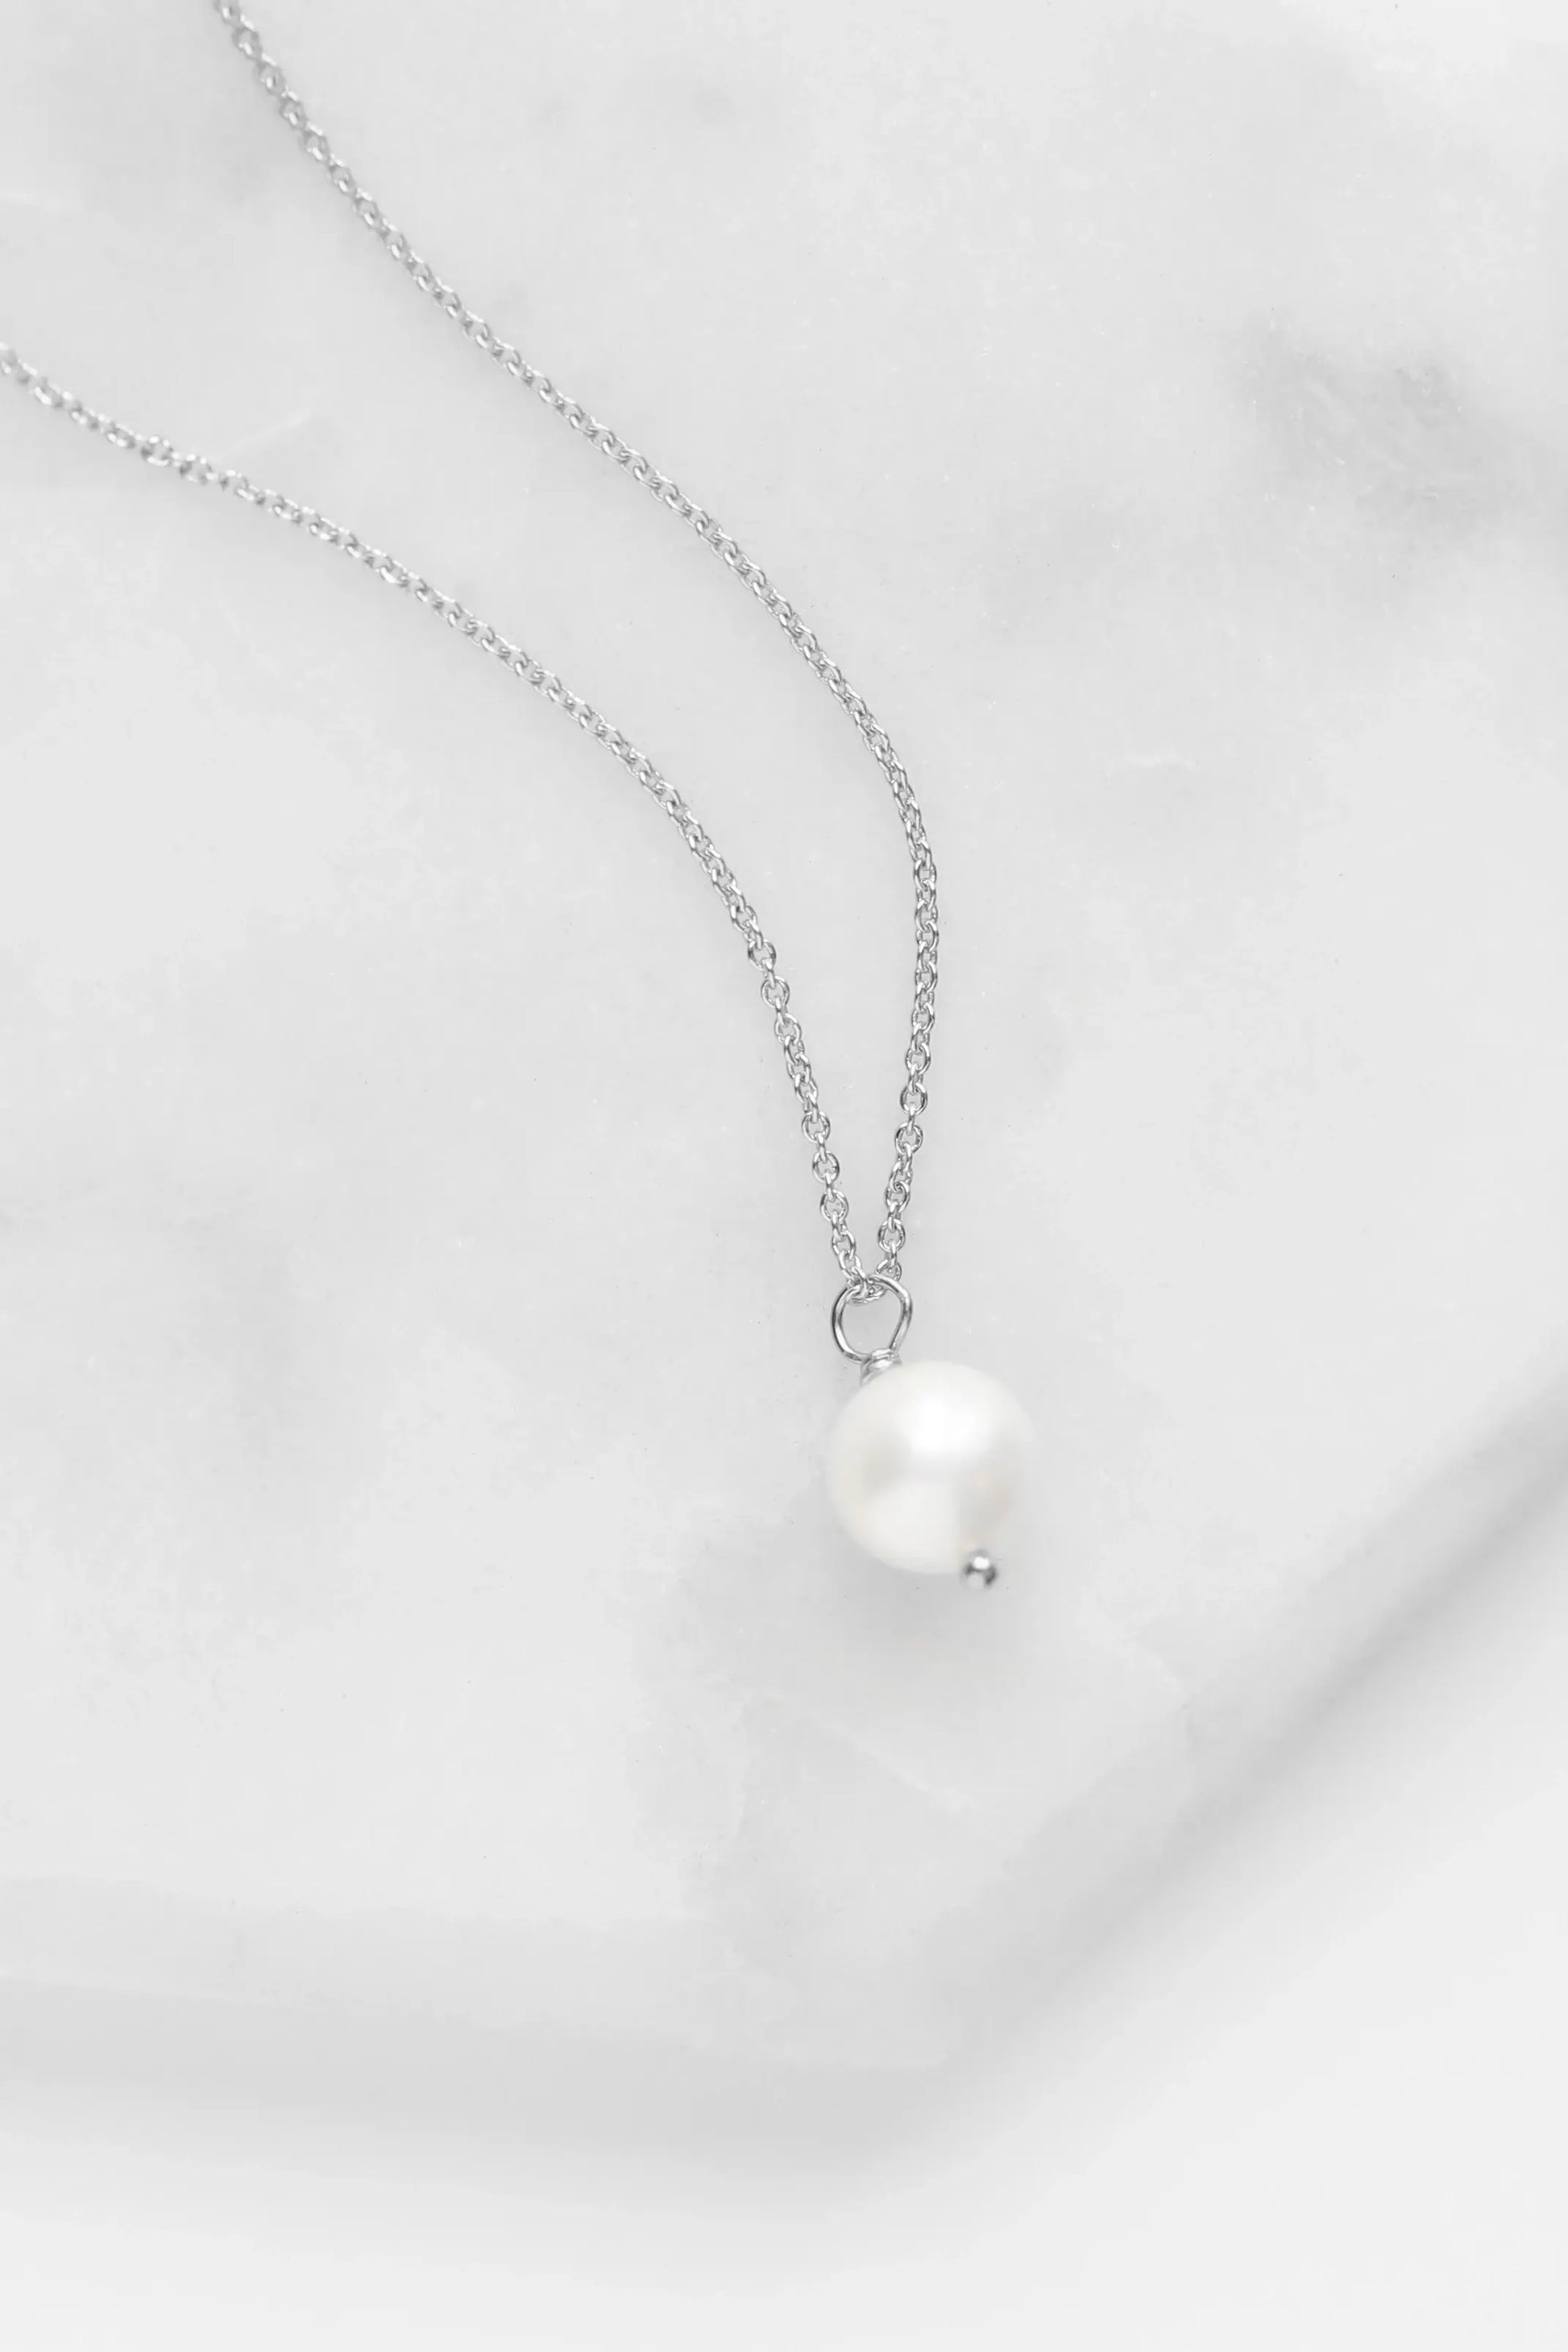 The    Ivory Pearl Necklace by  Francesca Jewellery from the Necklaces Collection.